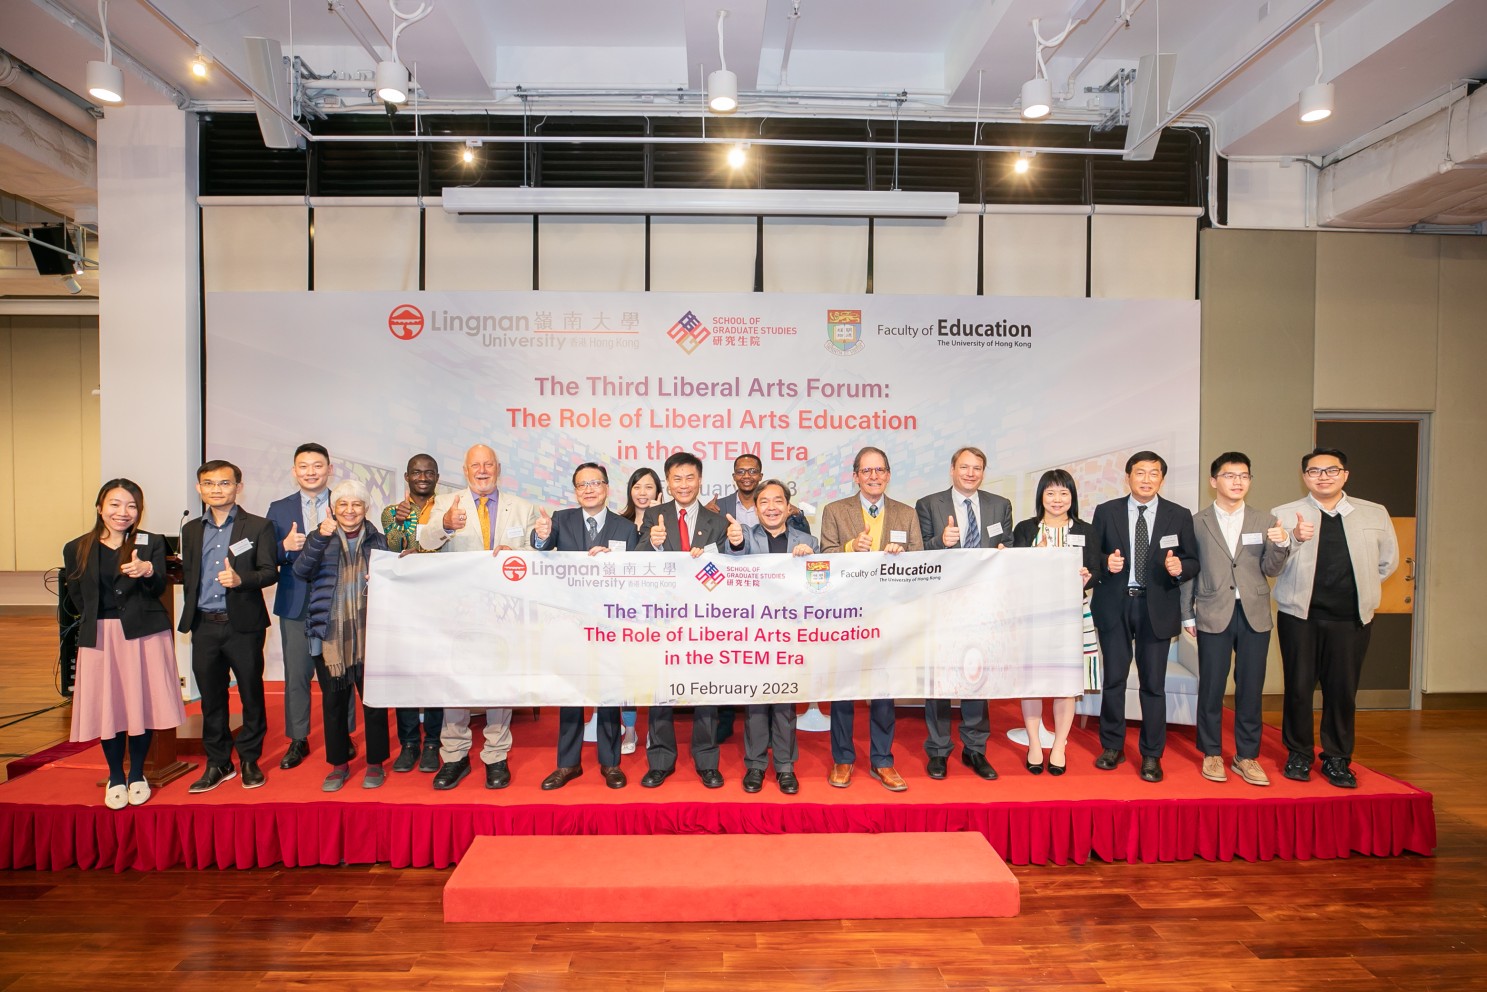 Lingnan University’s School of Graduate Studies and the Faculty of Education of the University of Hong Kong cohosts the Third Liberal Arts Forum.